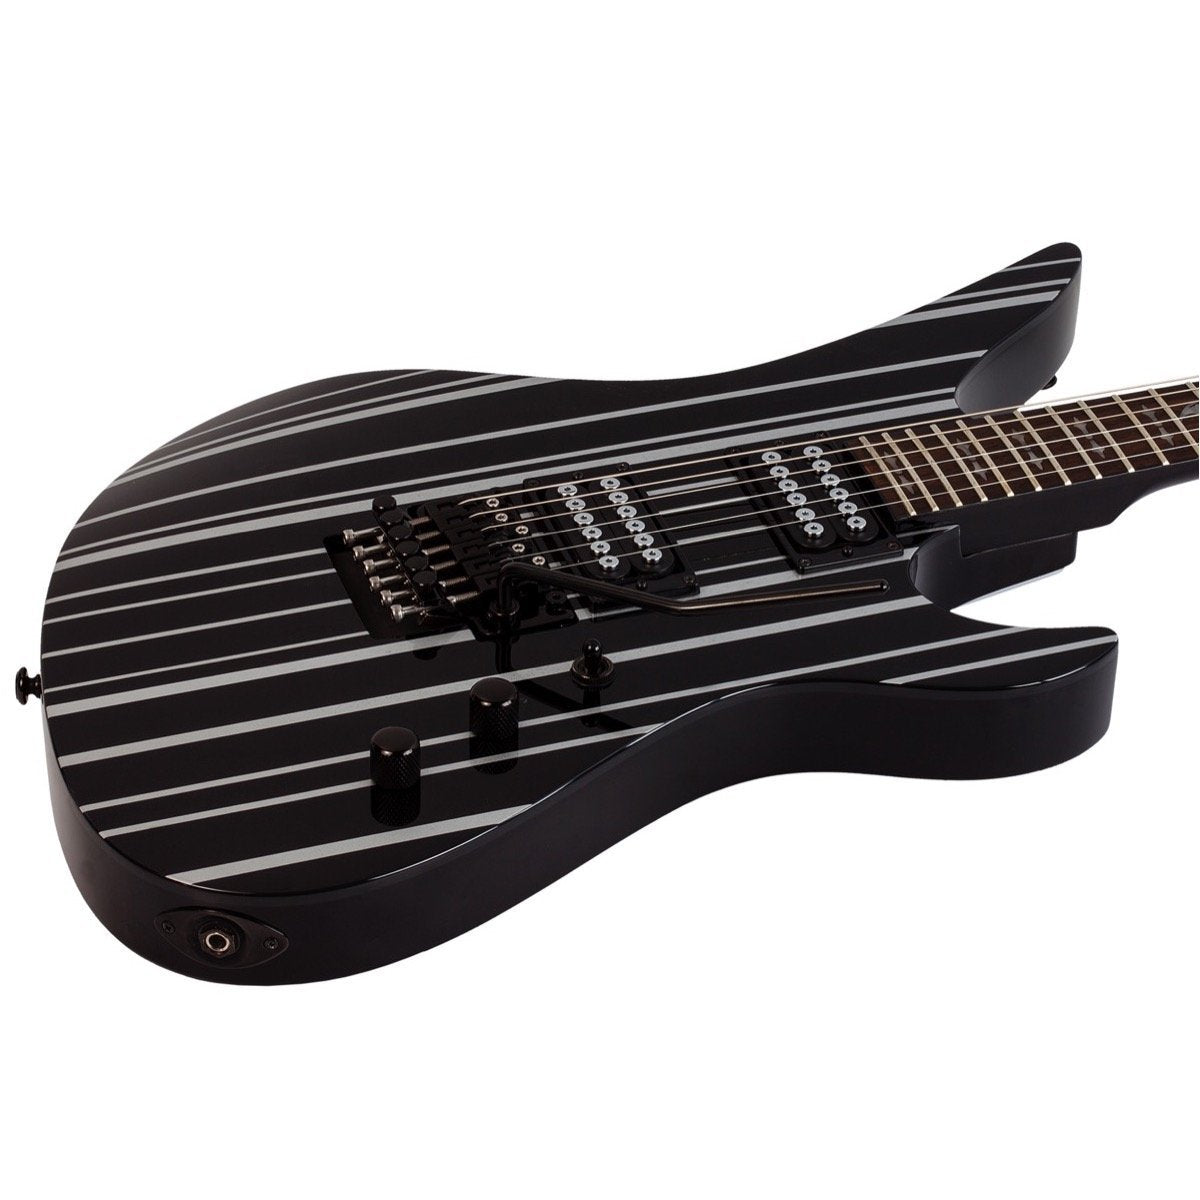 Schecter Synyster Gates Standard Electric Guitar, Black Silver Stripes